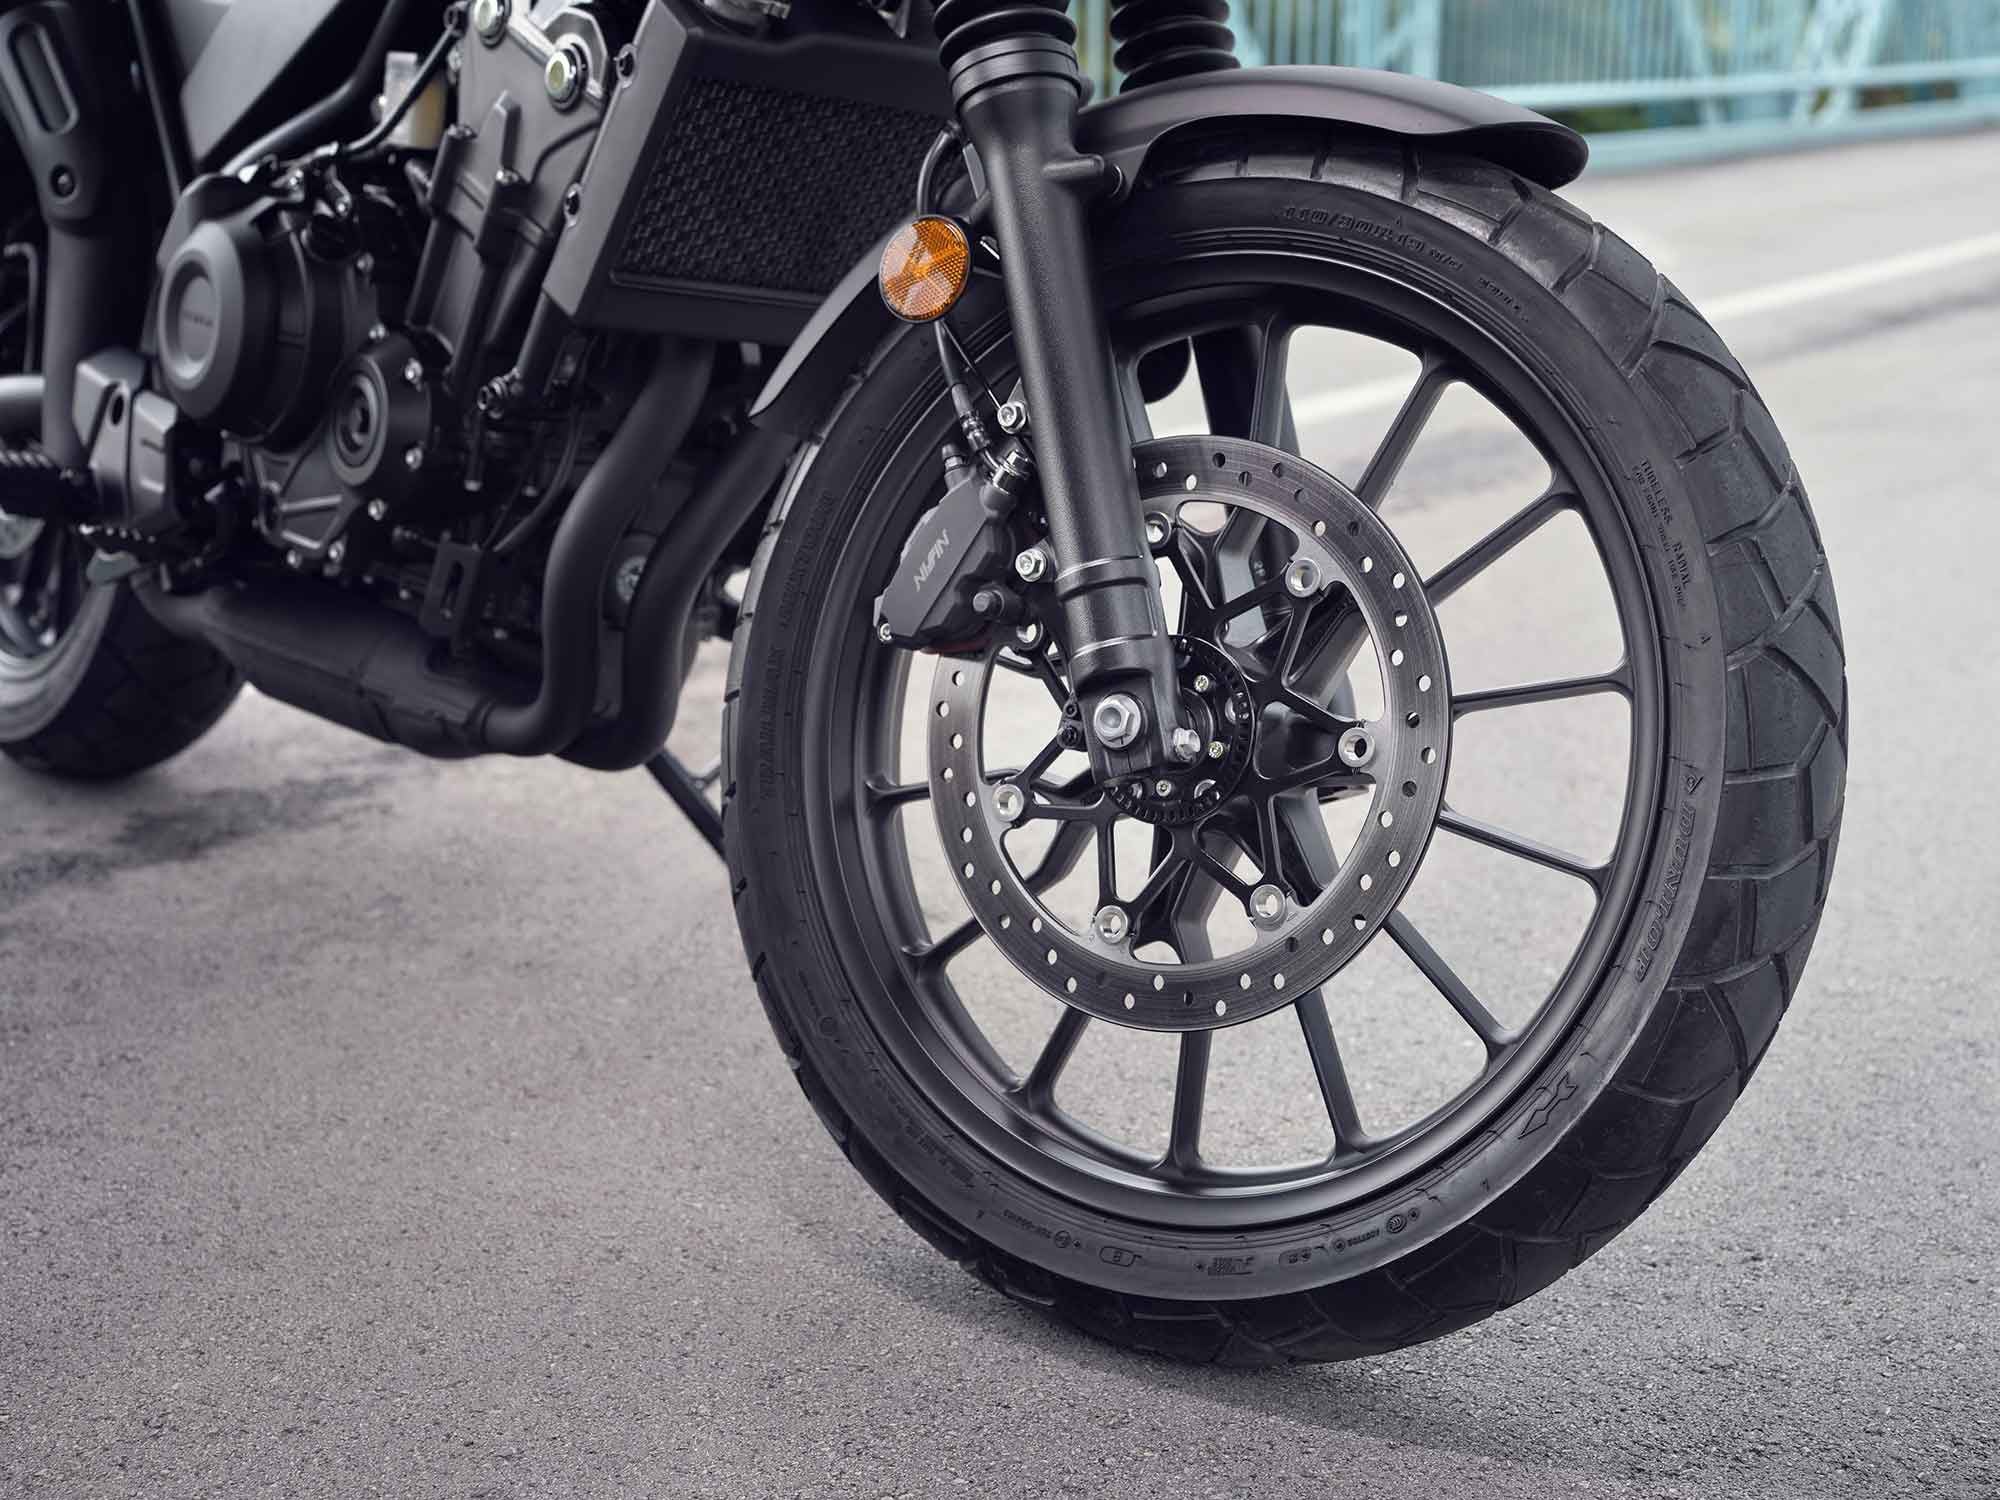 The front end has a standard, upright fork, a single twin-piston brake caliper and disc.